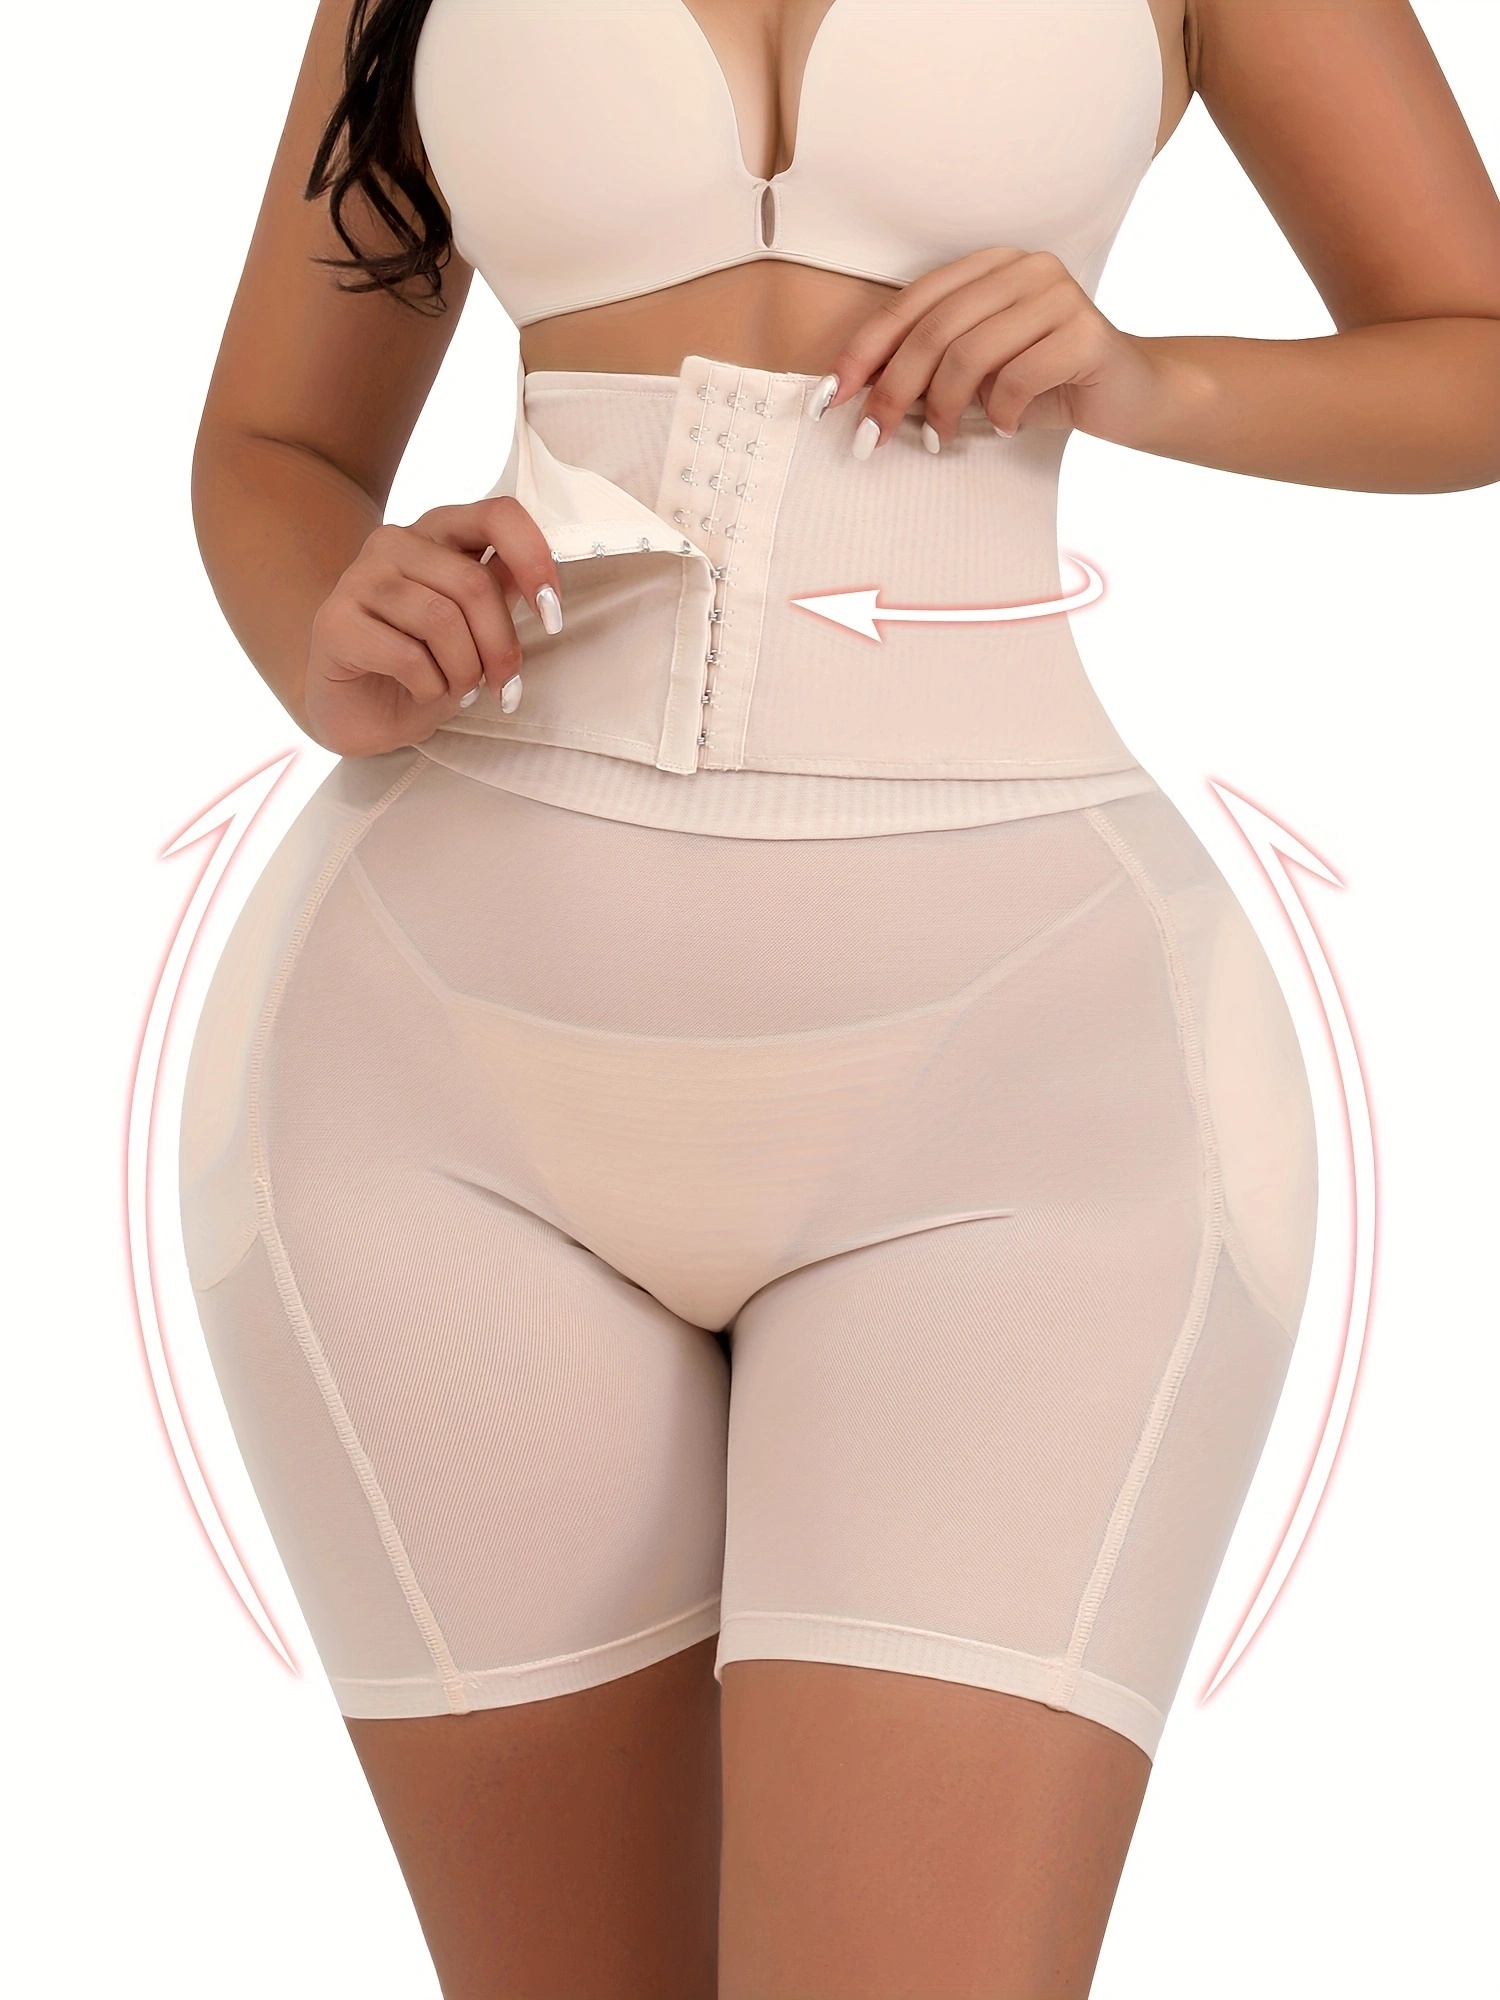 High Waisted Slimming Belly Tummy Control Knickers Body Shaper